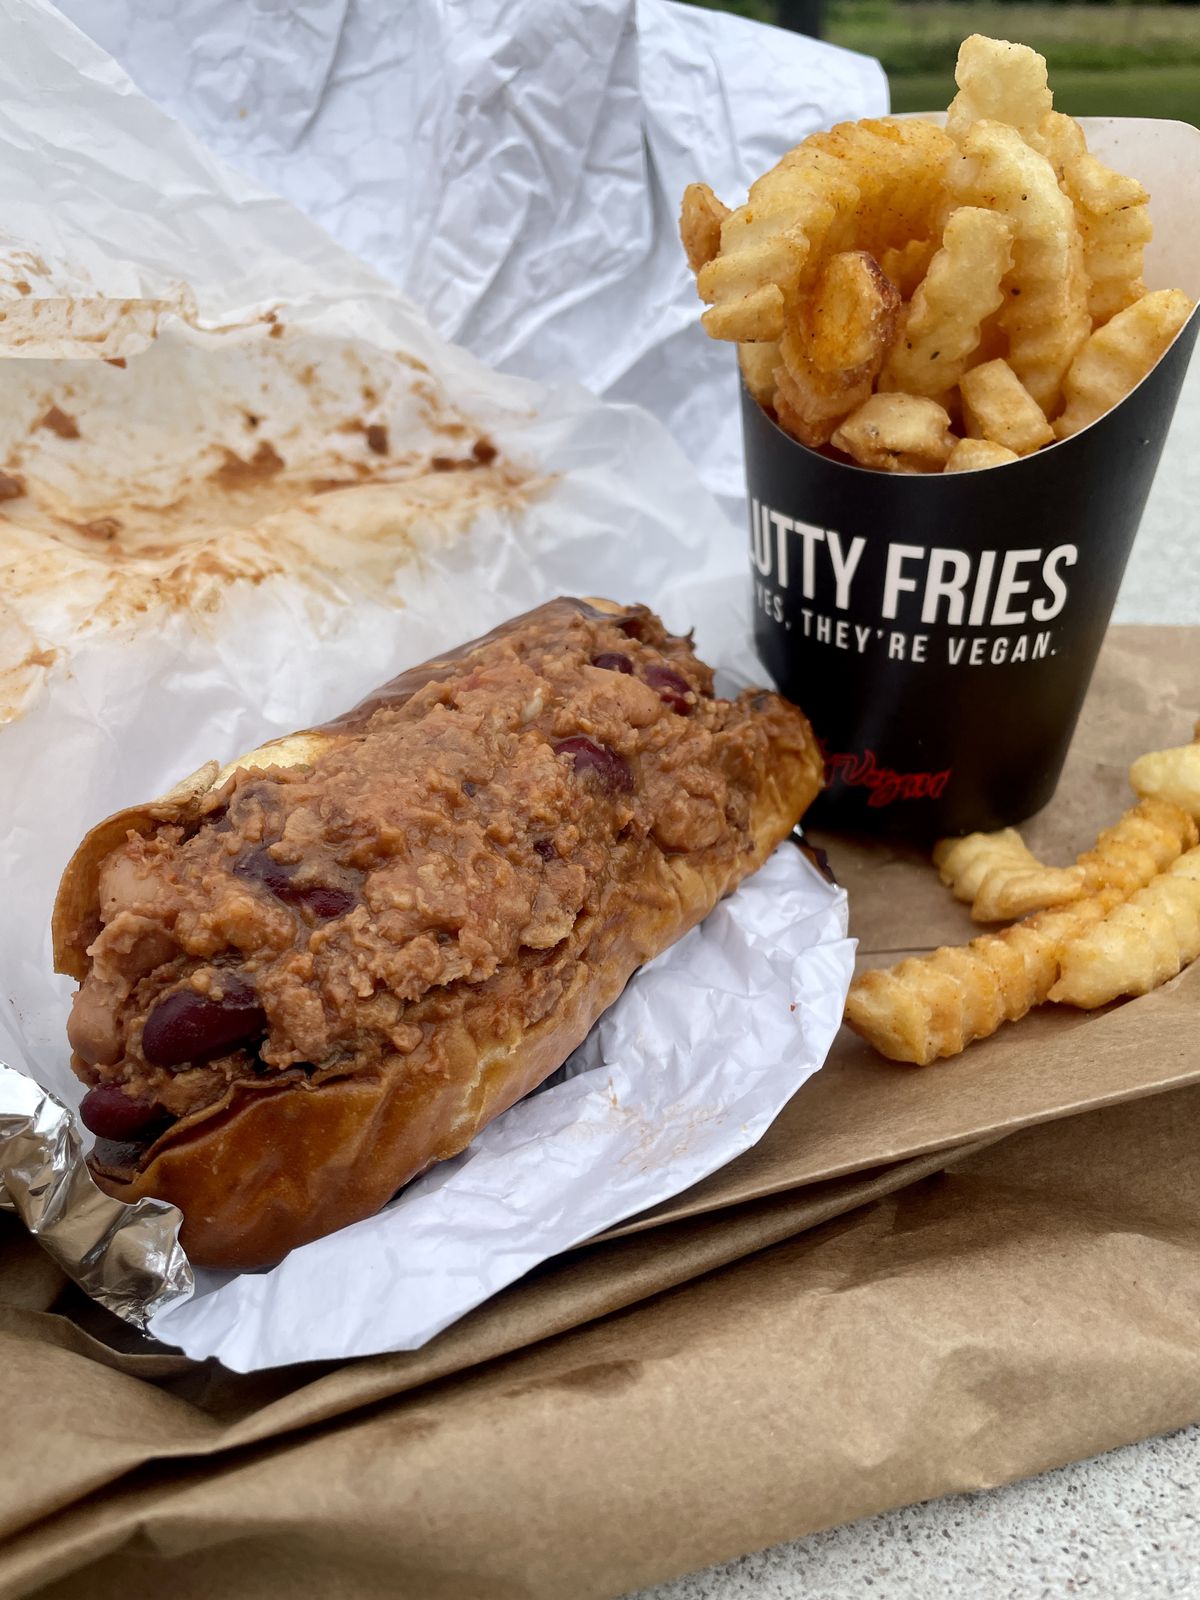 Hot dog covered with chili and served with french fries.  They both sit on a foil wrapper with a brown paper bag on the right side. 